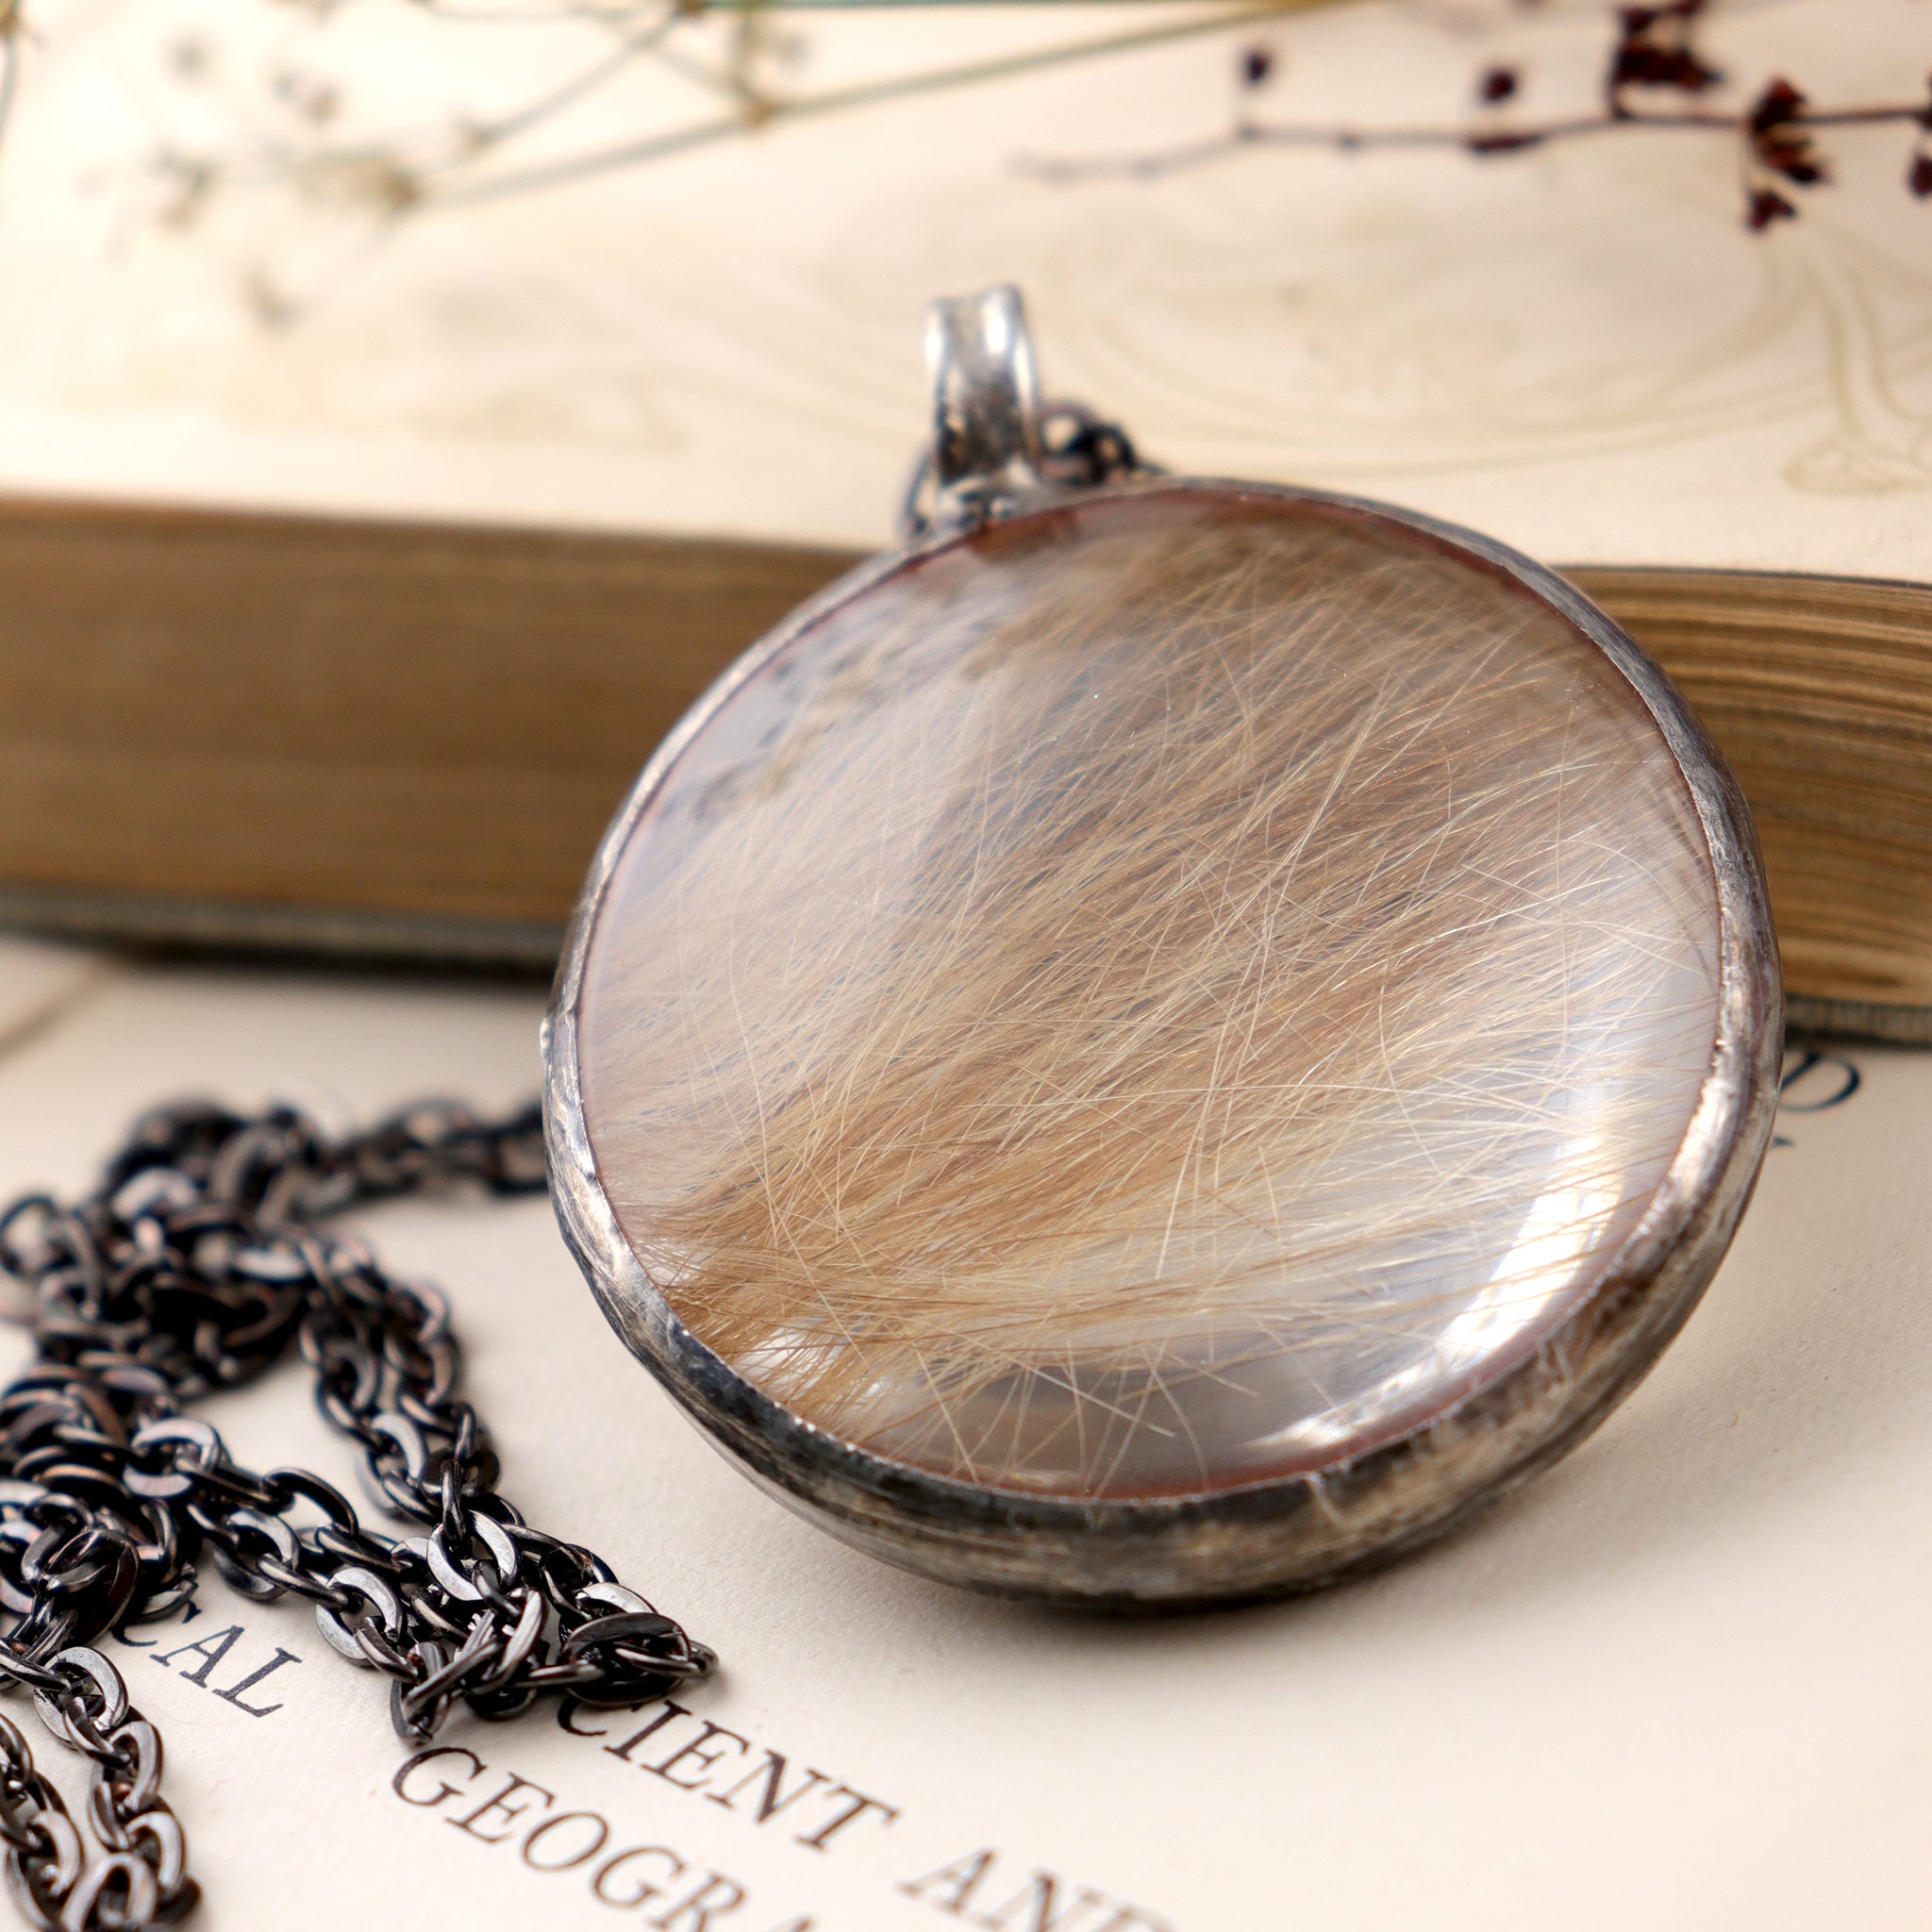 Baby hair necklace laying on an old book